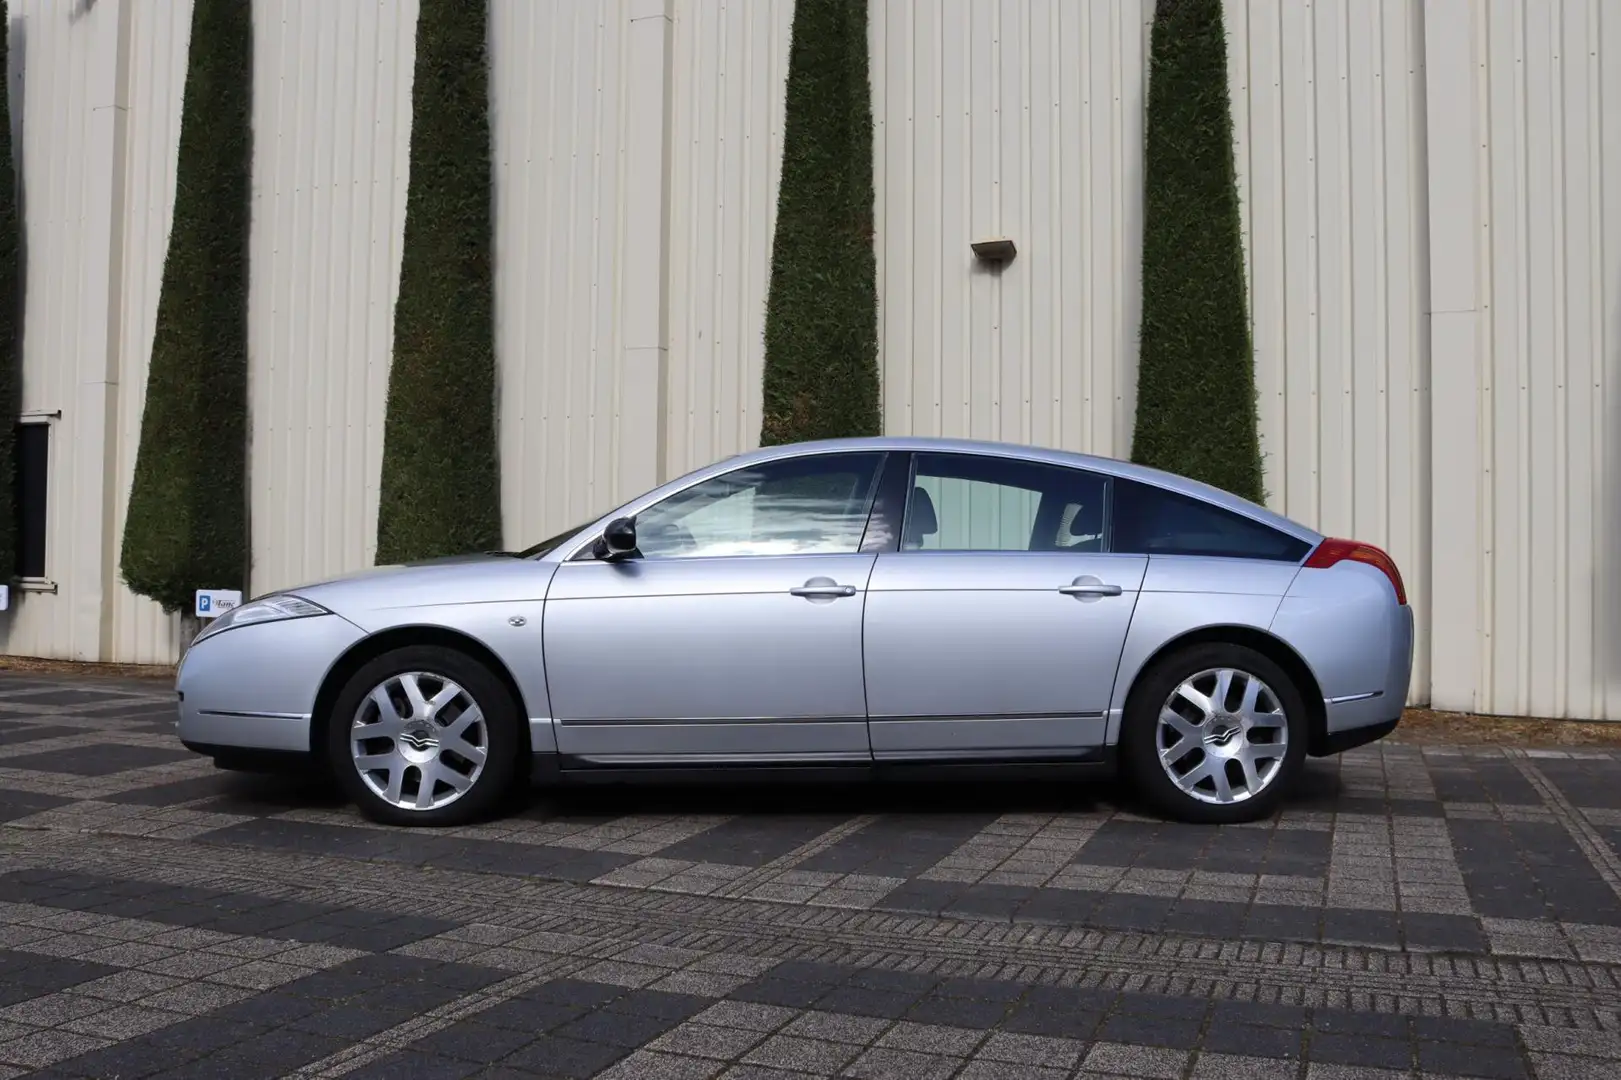 Citroen C6 2.7 HdiF V6 Exclusive Climate Control, Automaat Na siva - 2